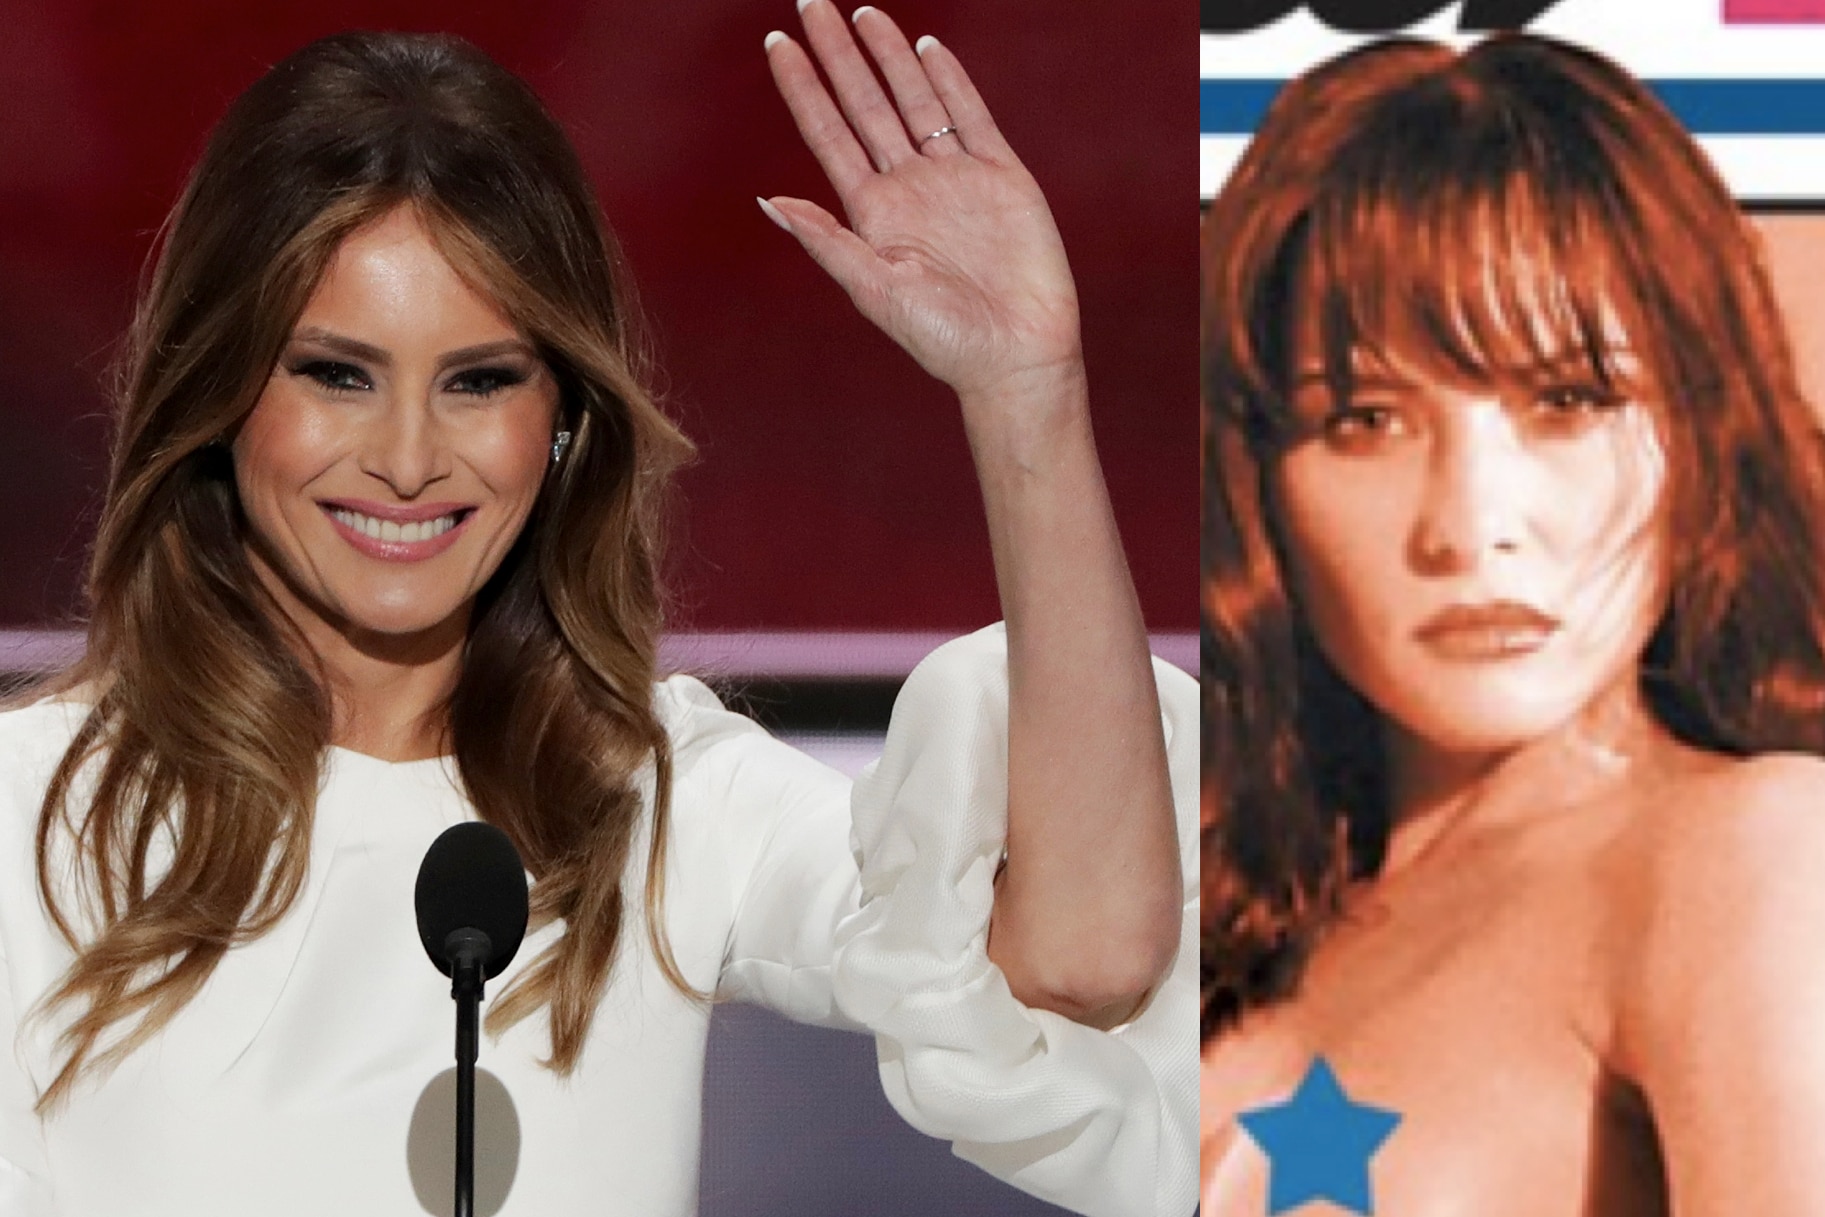 Naked Photos Of Melania Trump Were Published In The Ny Post Very Real